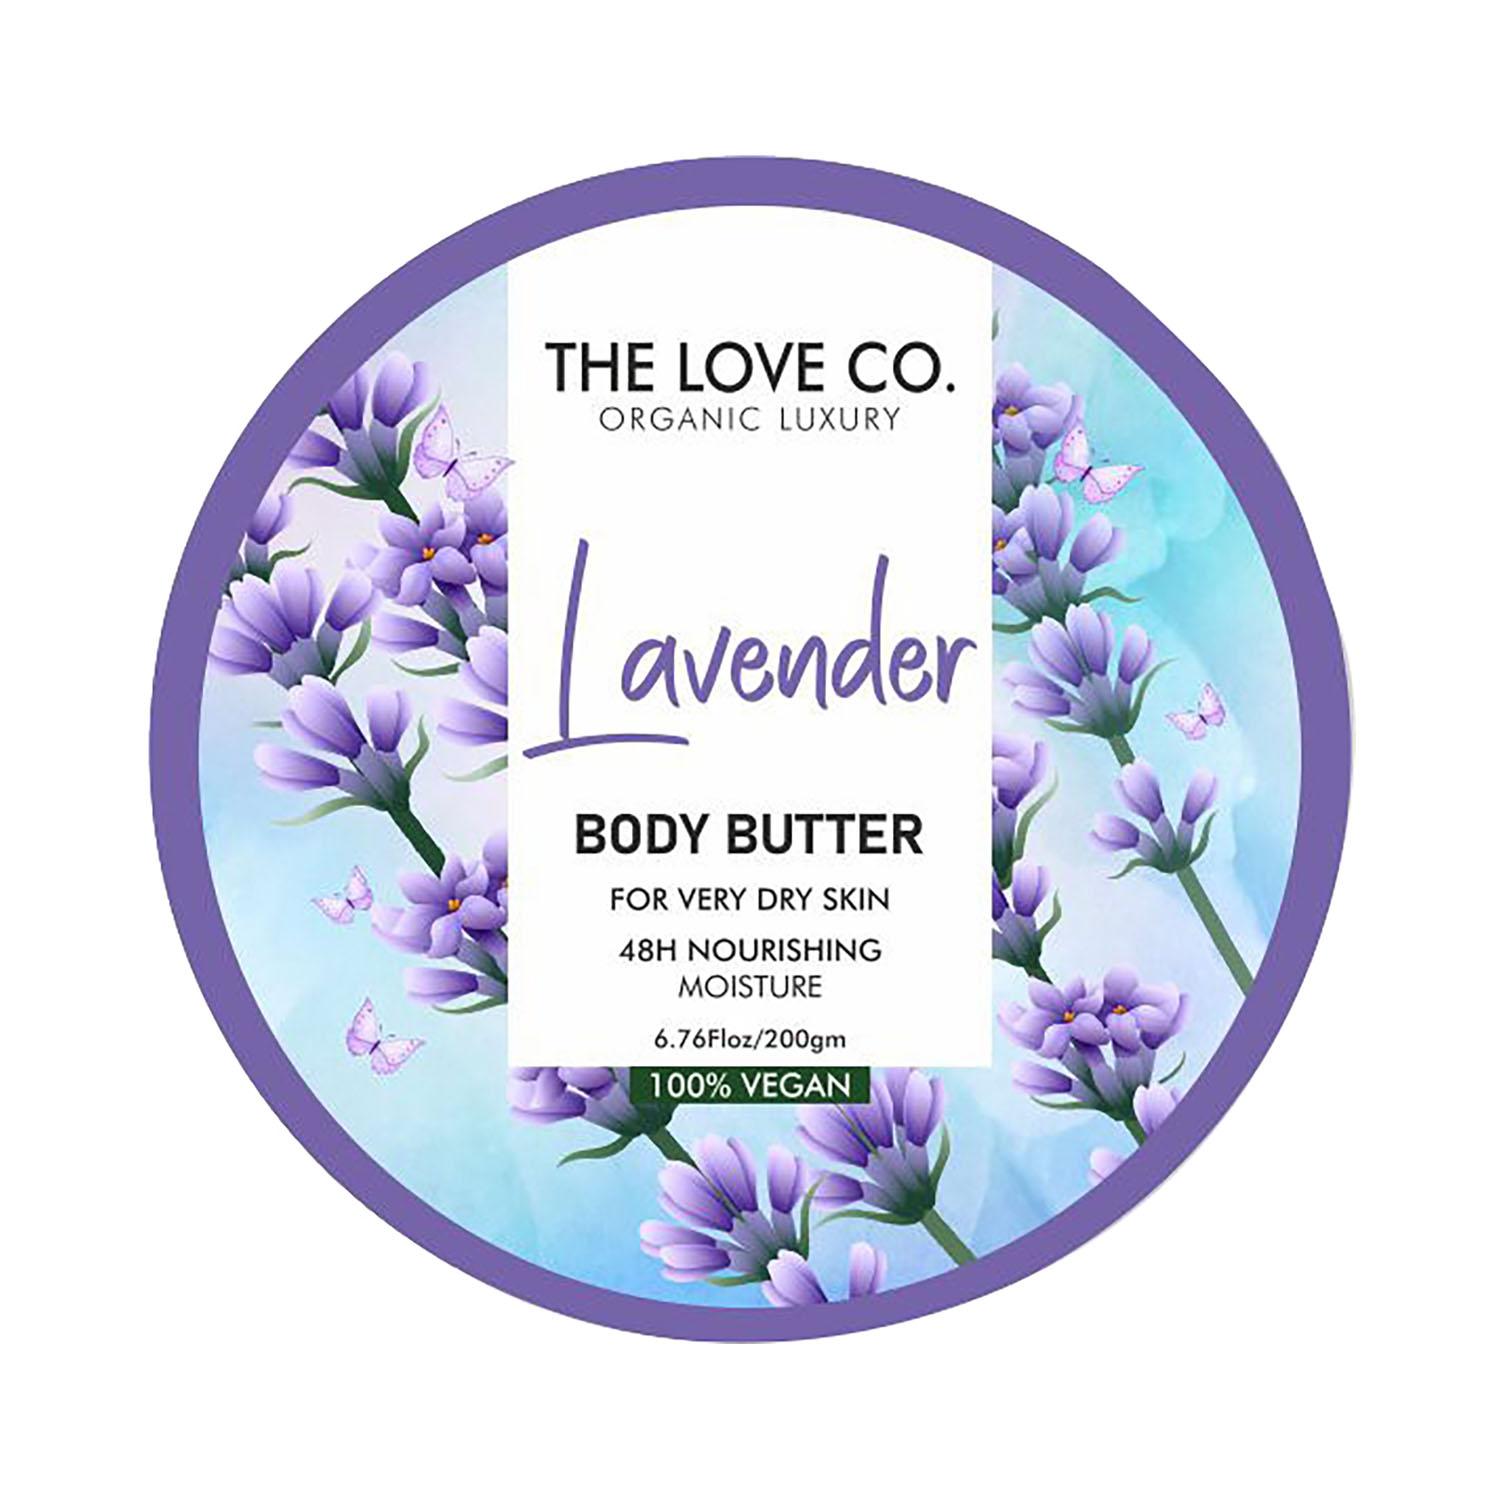 THE LOVE CO. Lavender Body Butter Deep Moisturization With Pure Shea Butter (200g)